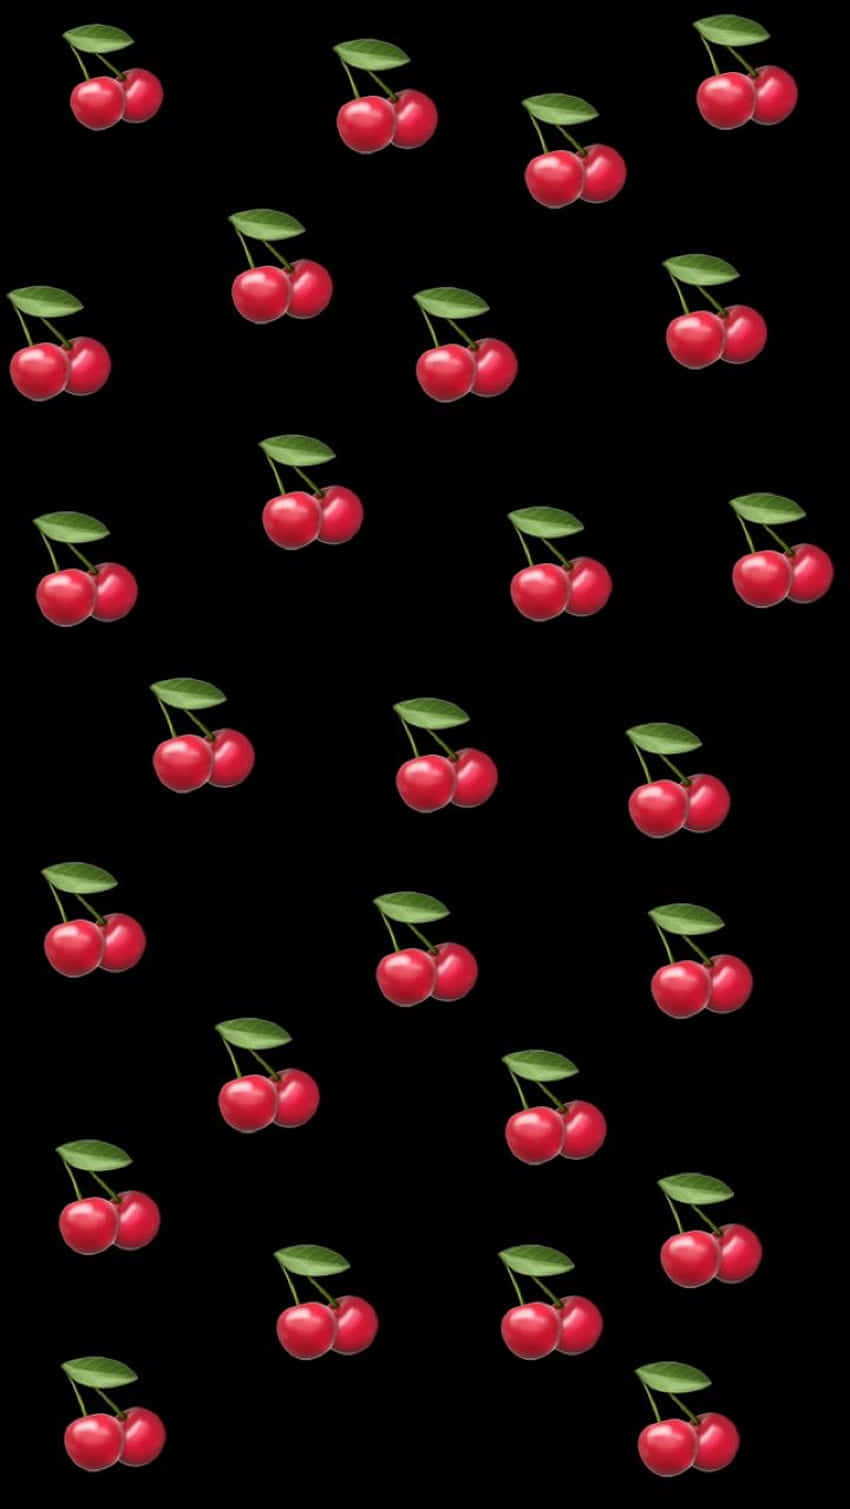 Cute Red Cherries With Glossy Surface Wallpaper